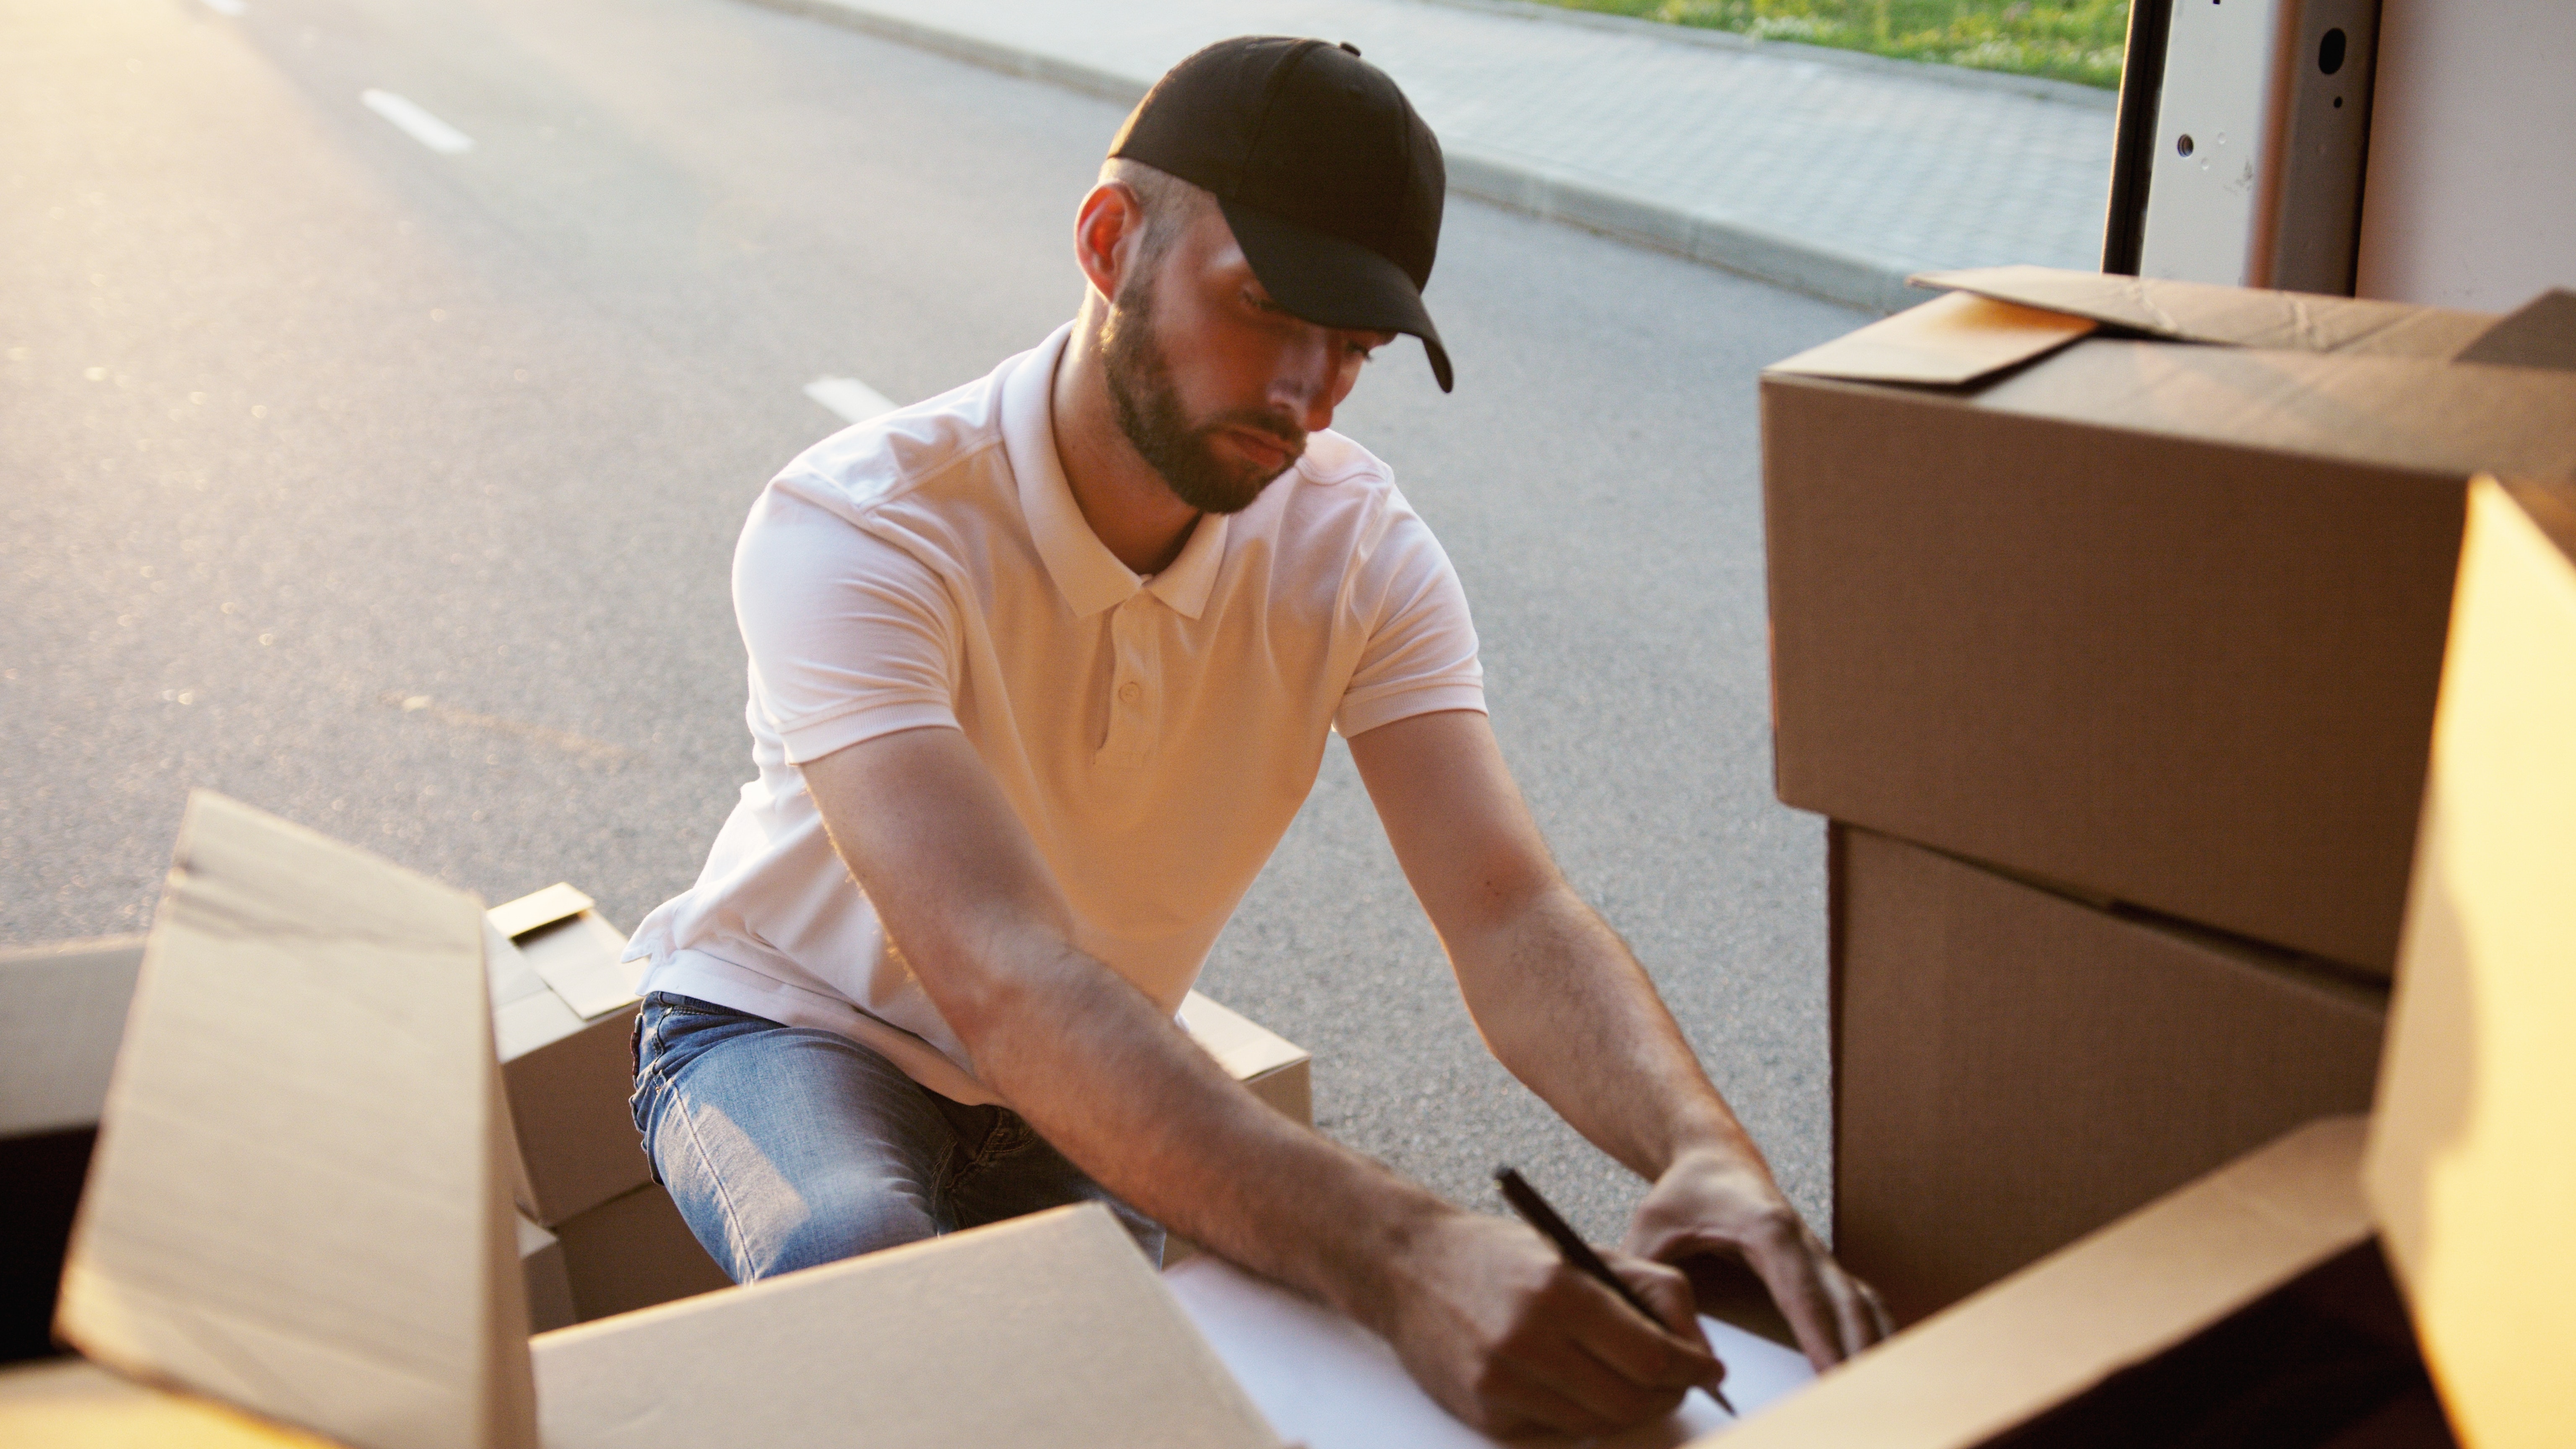 Stock Photo of man unloading truck with boxes 